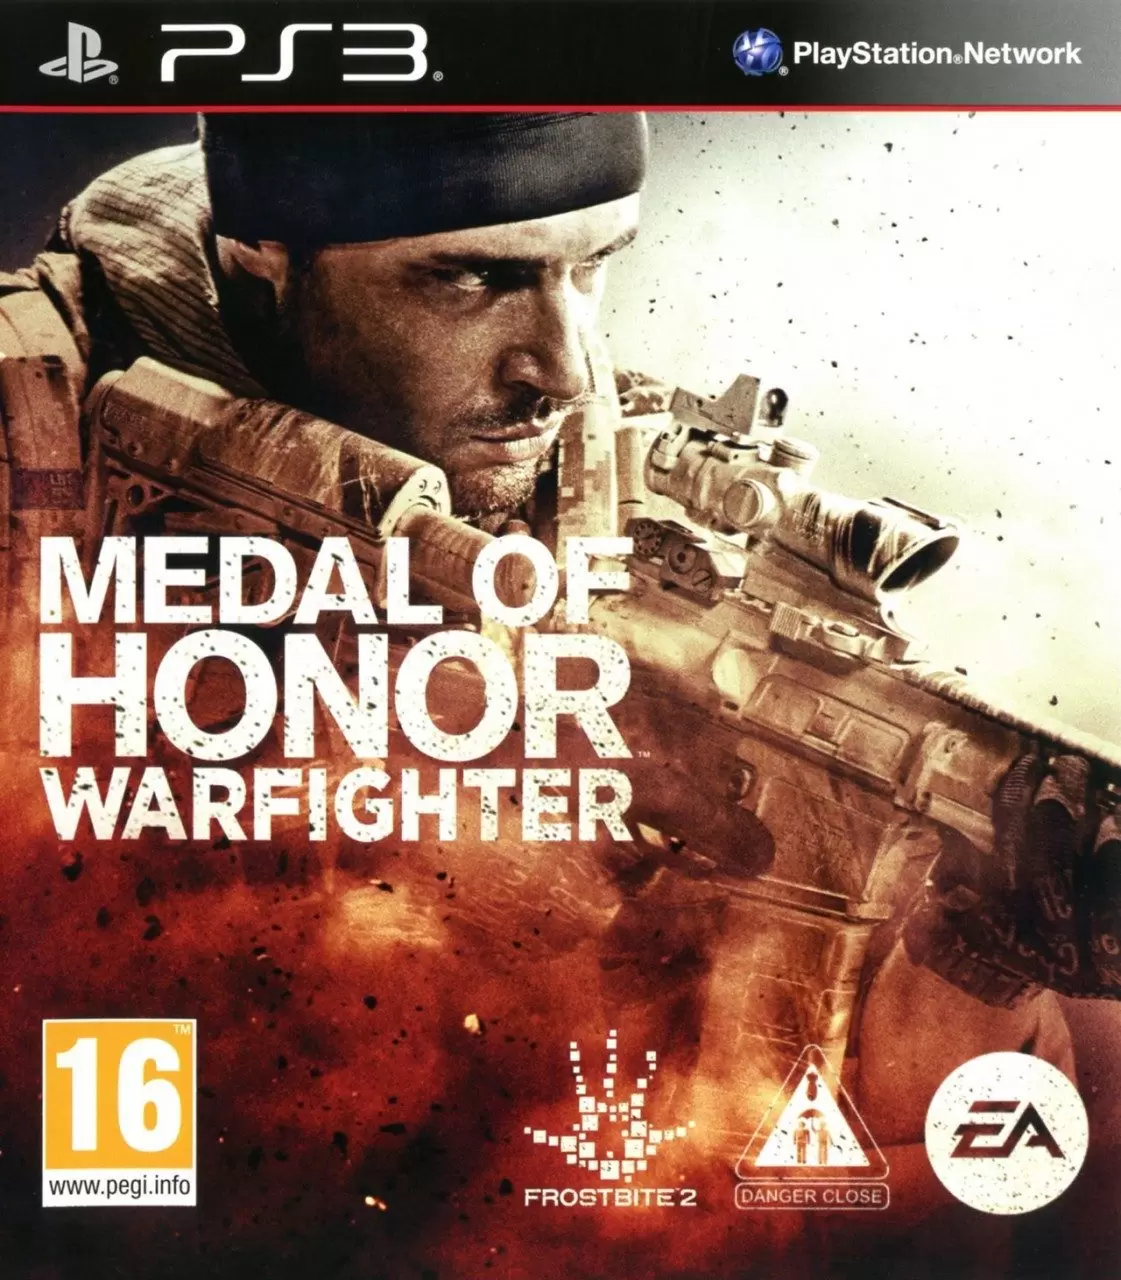 PS3 Games - Medal of Honor: Warfighter